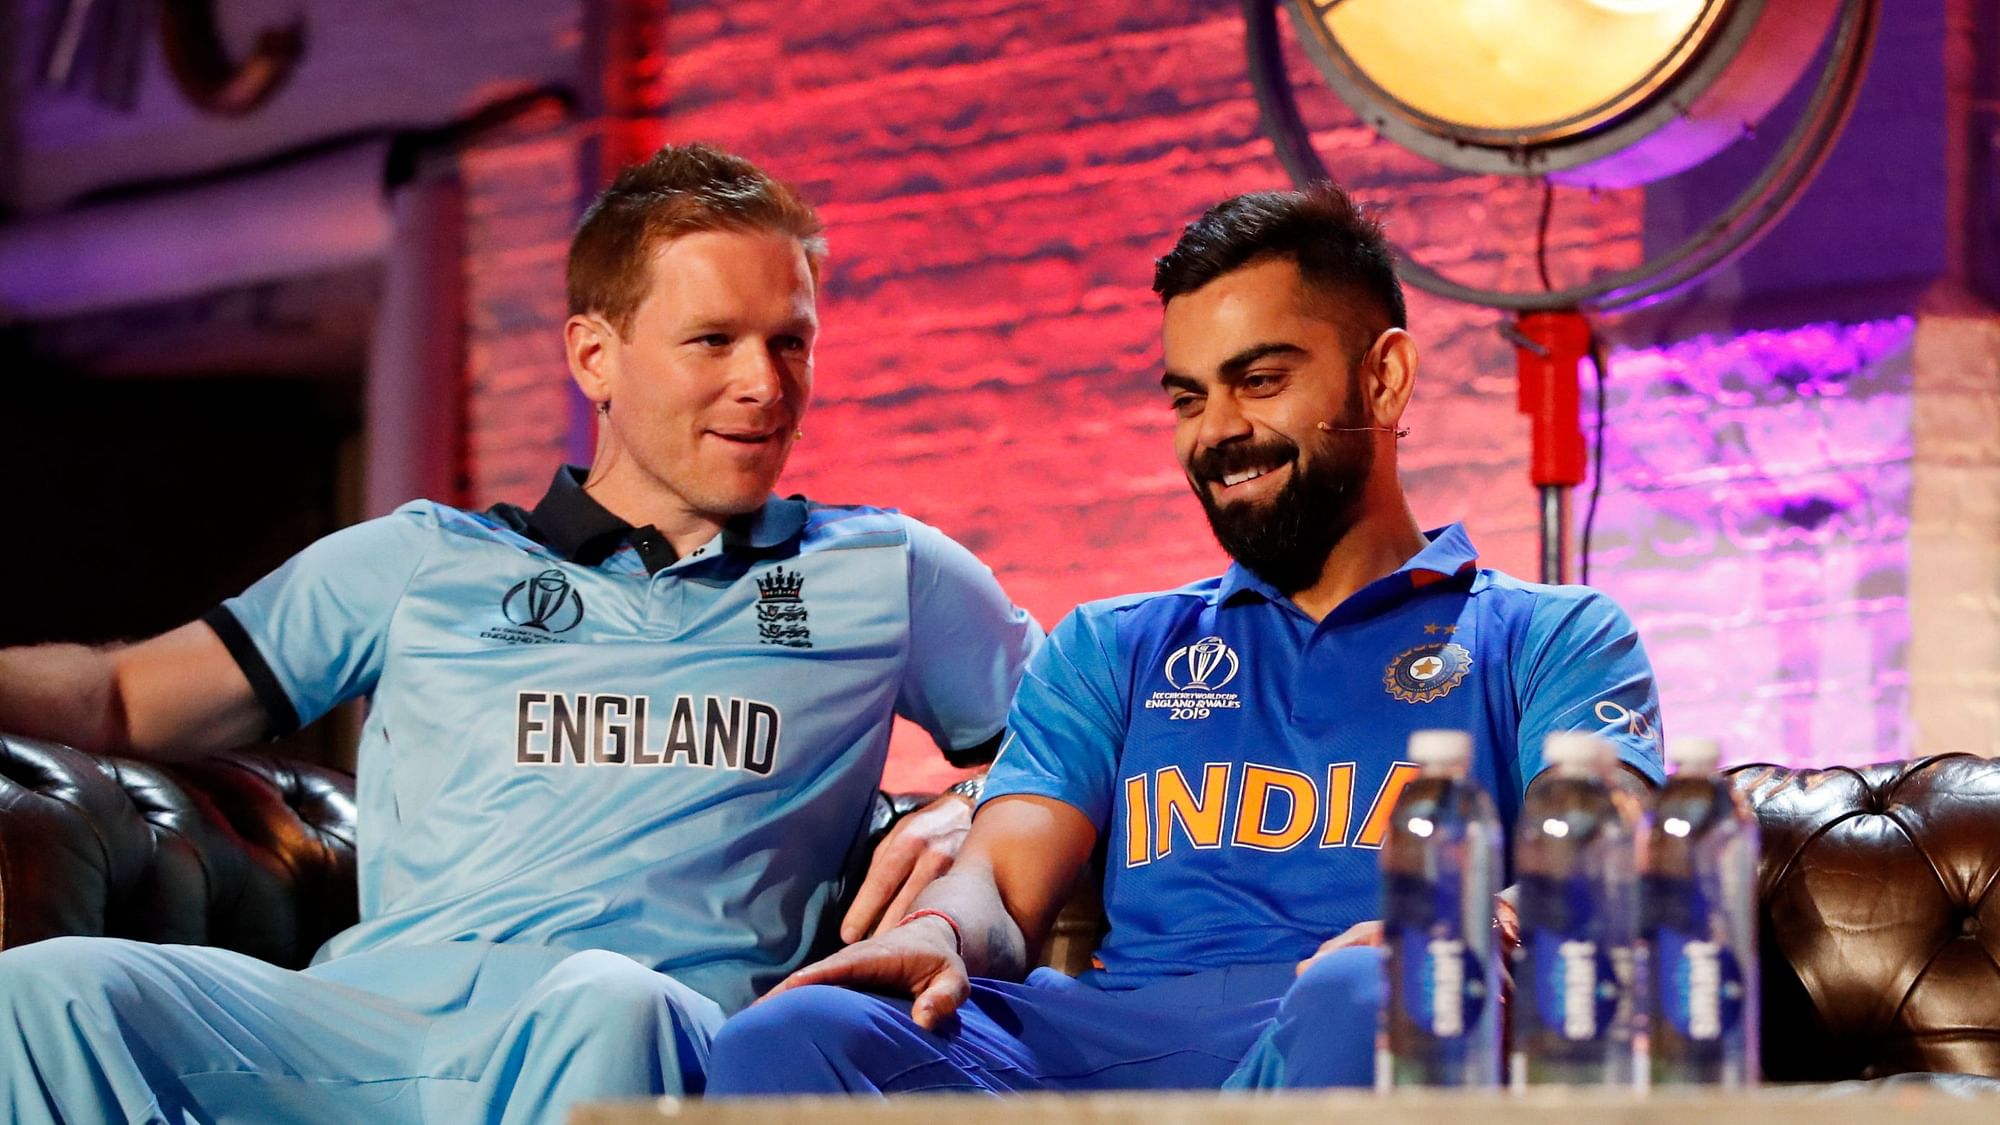 England’s captain Eoin Morgan and Virat Kohli at the ICC Cricket World Cup captains press conference.